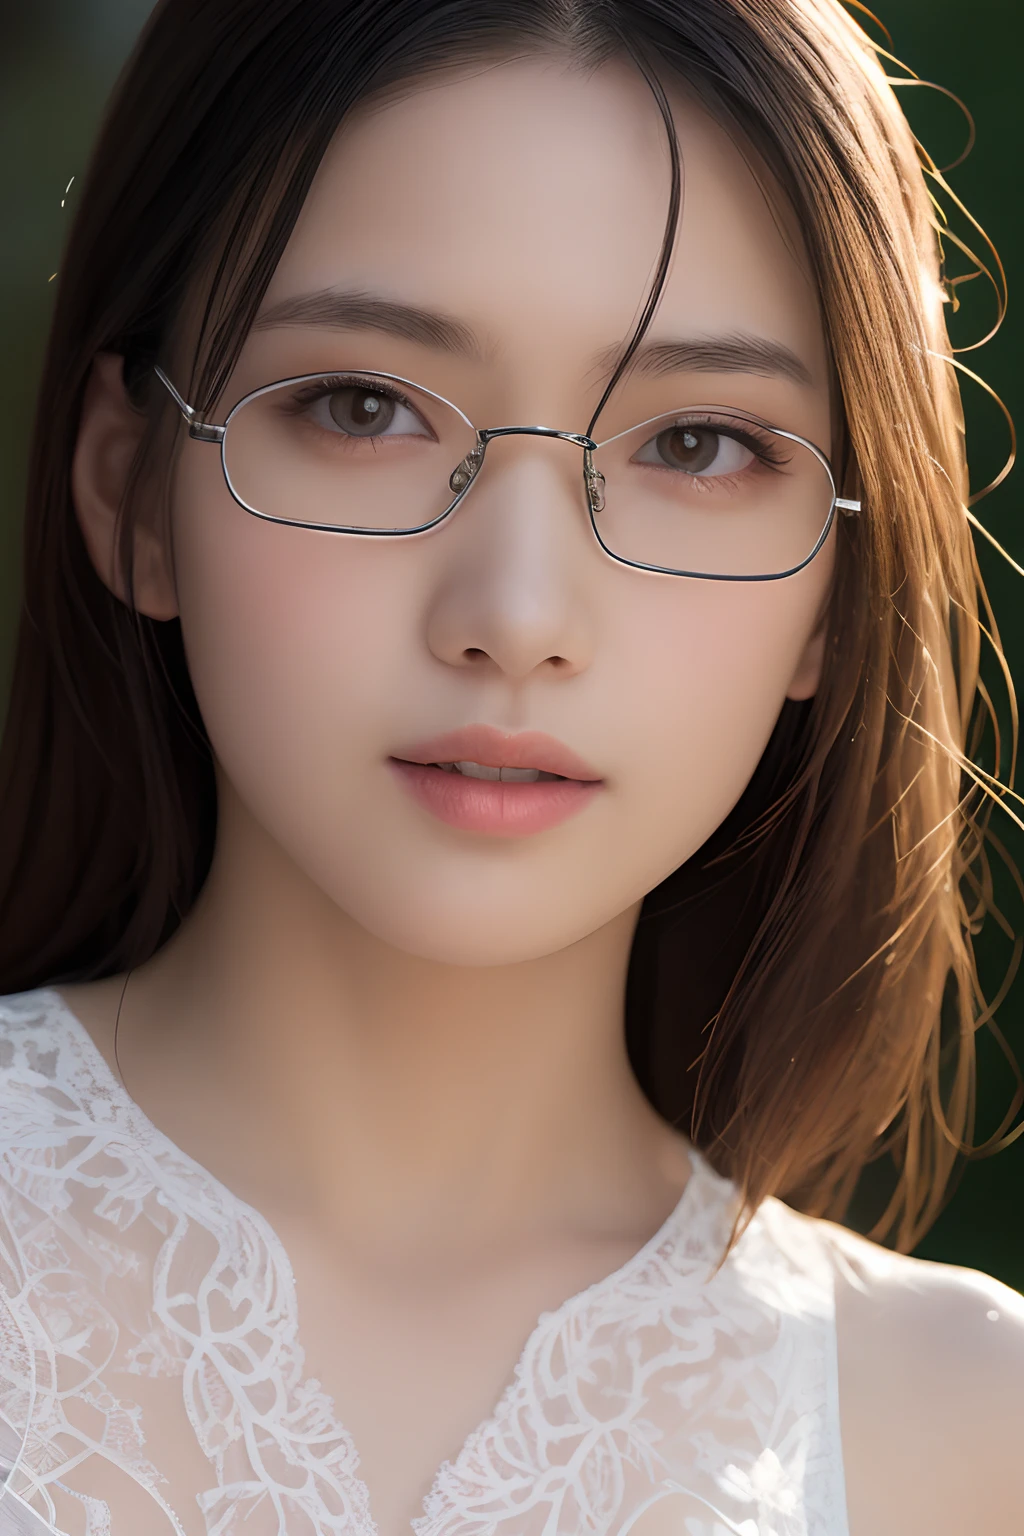 best qualtiy、tmasterpiece、超A high resolution、Realistic、1 rapariga、glowy skin、((hyperrealistic detailed))、Global Illumination、8K、Colossal 、highly intricate detail、Realistic light、radiant eyes、Transparent lace，Lace see-through，Silver glasses